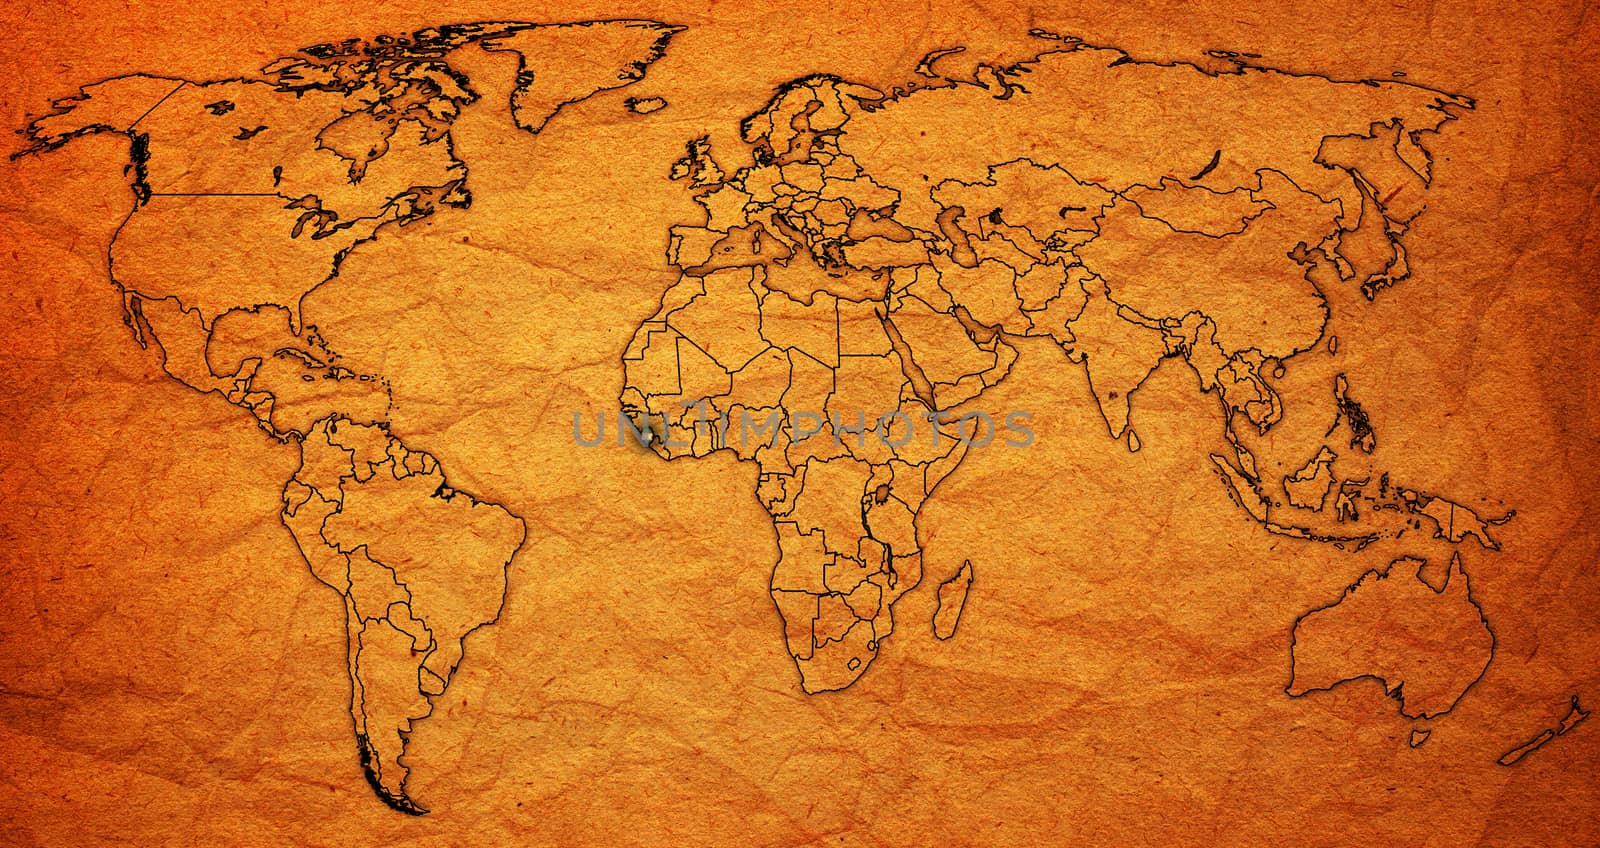 sierra leone territory on world map by michal812